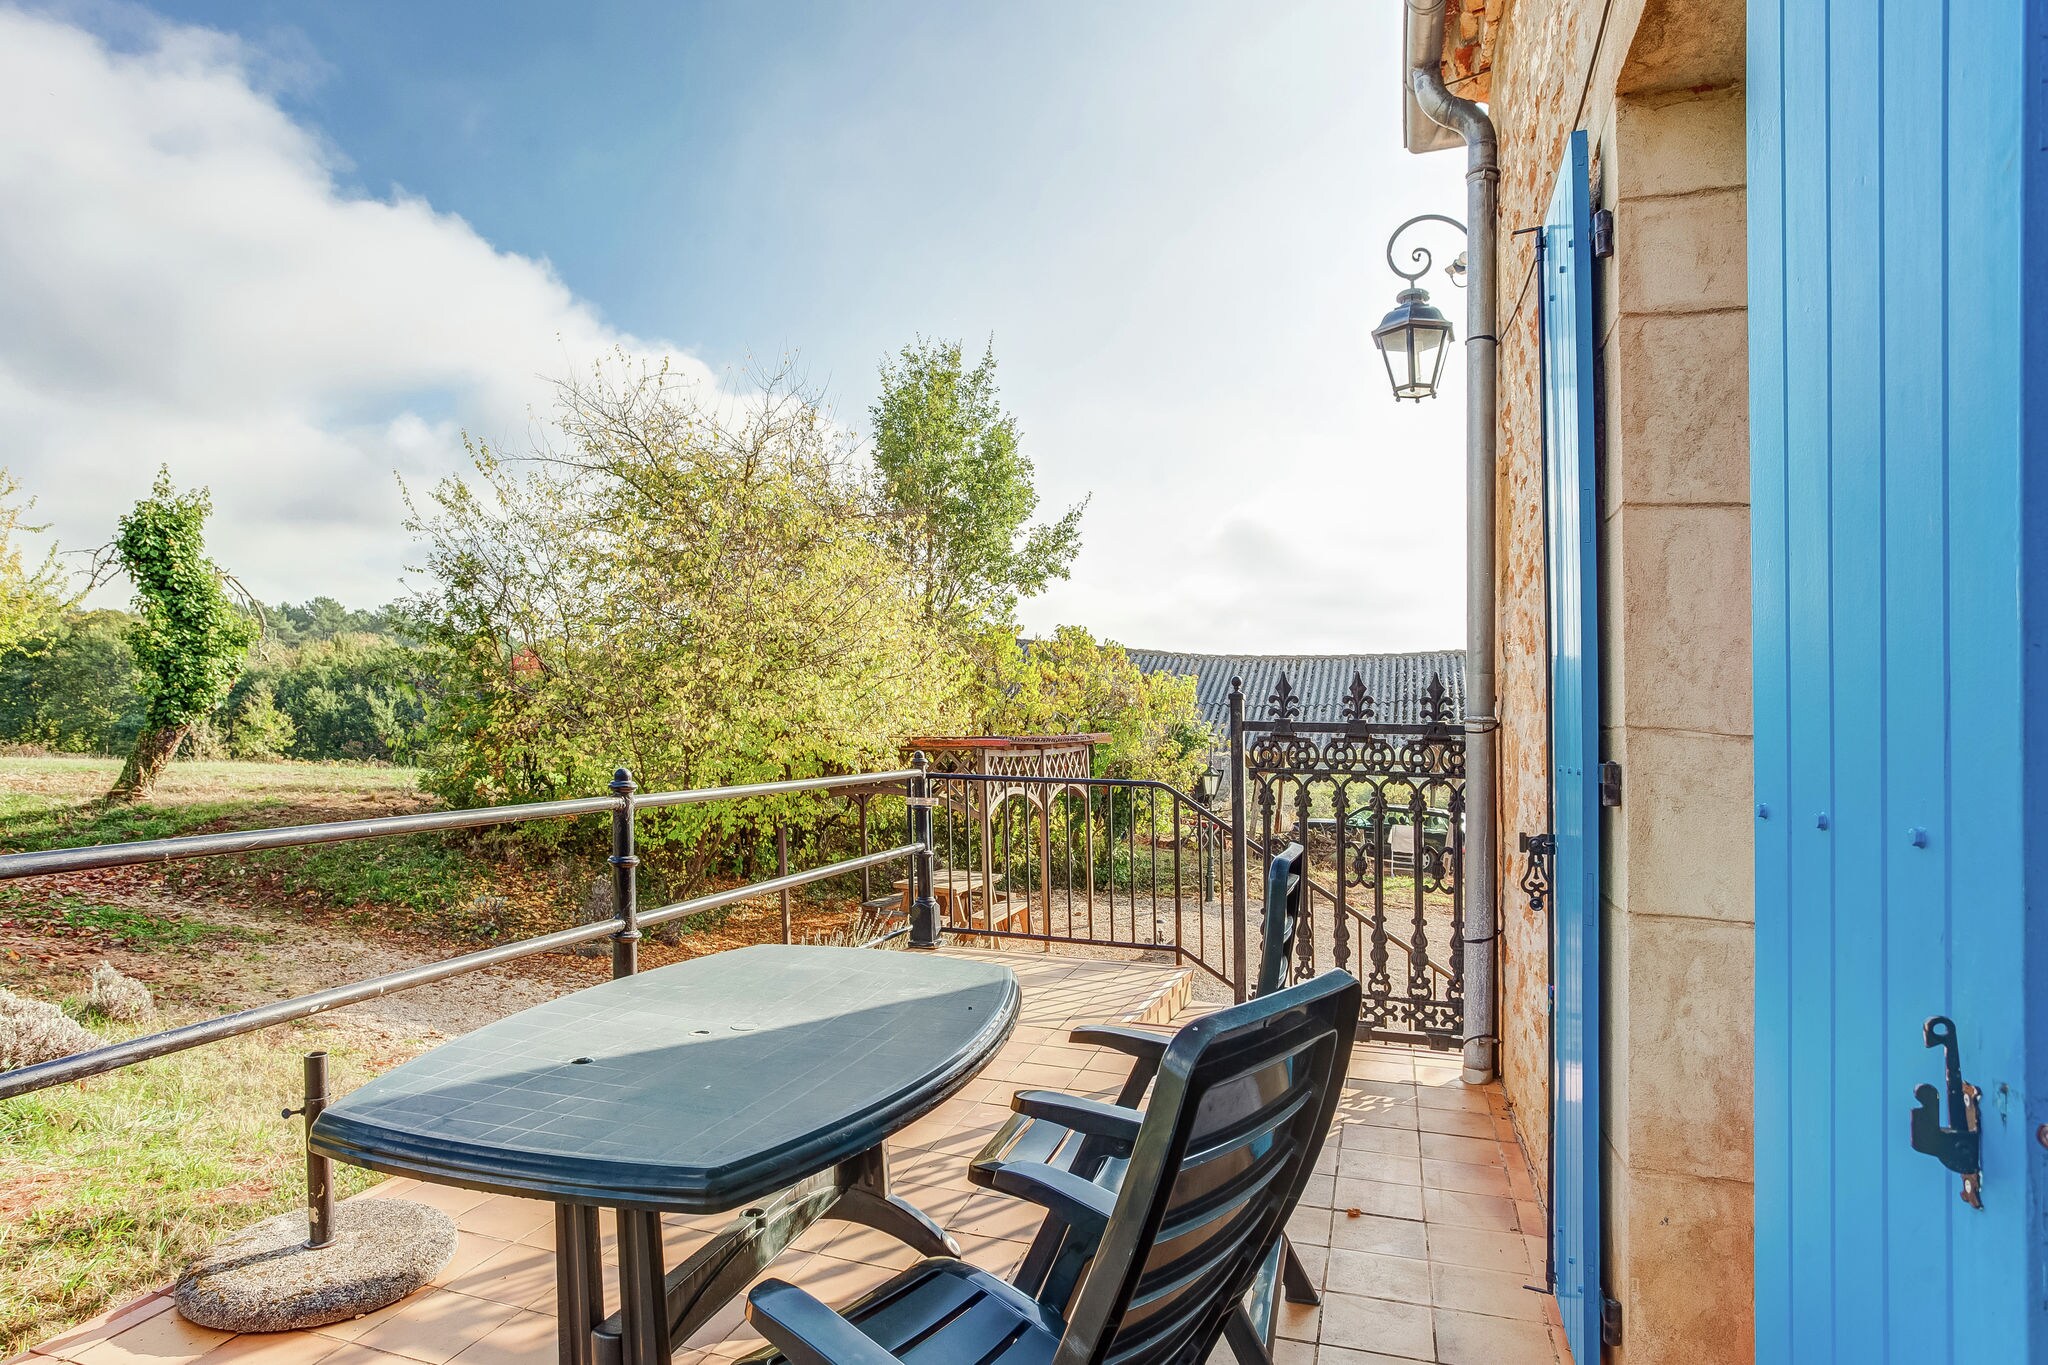 Authentic holiday home in Puy-L'evêque with private pool